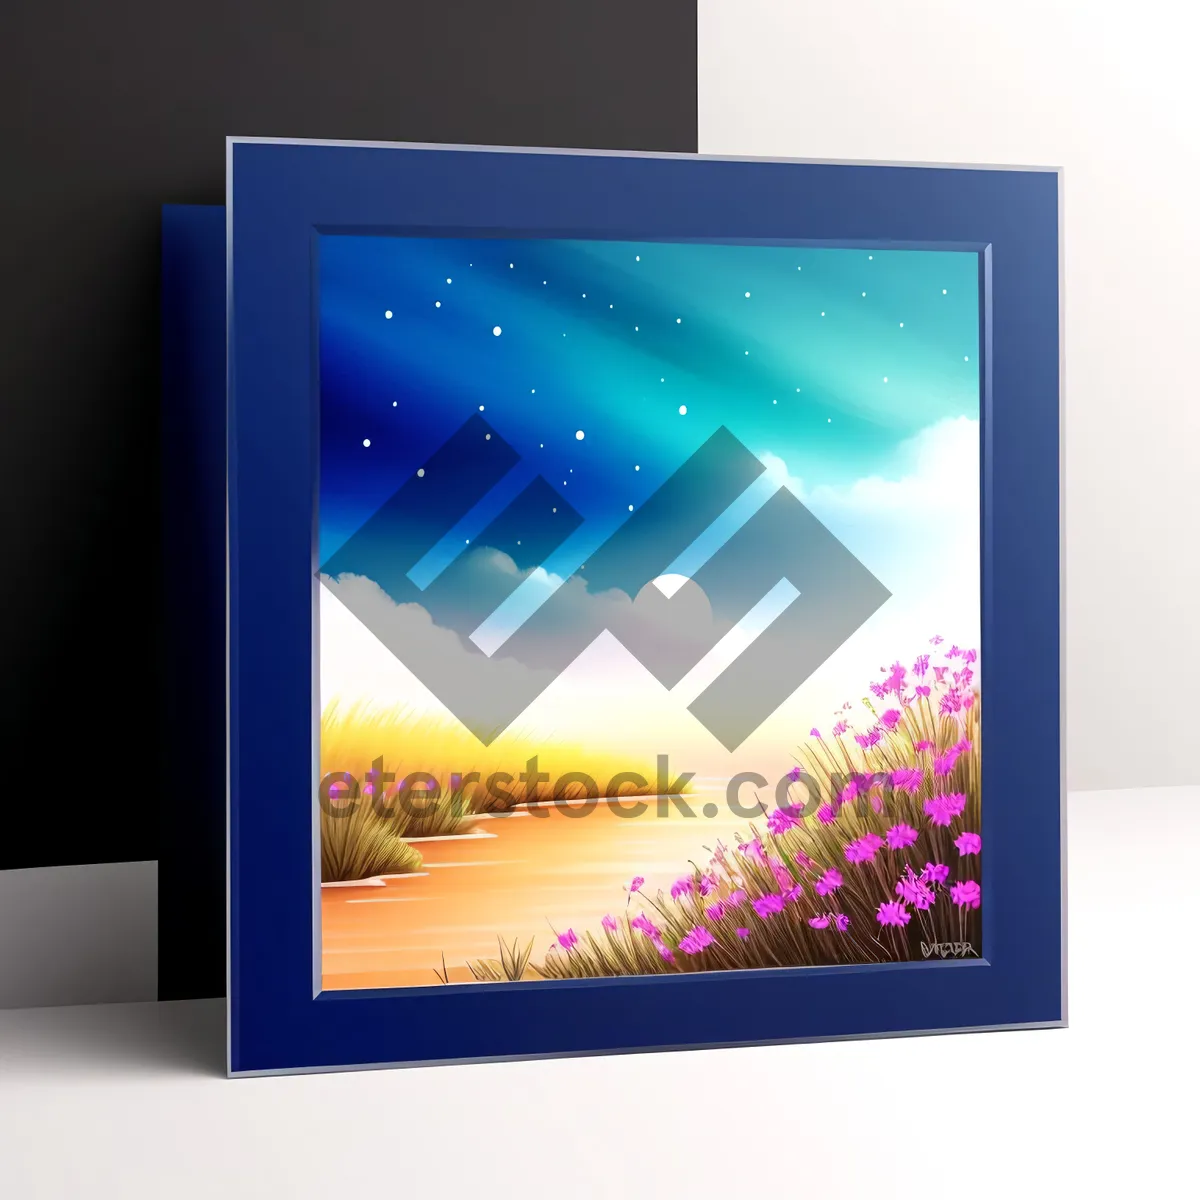 Picture of Modern LED Monitor Display for Digital Business